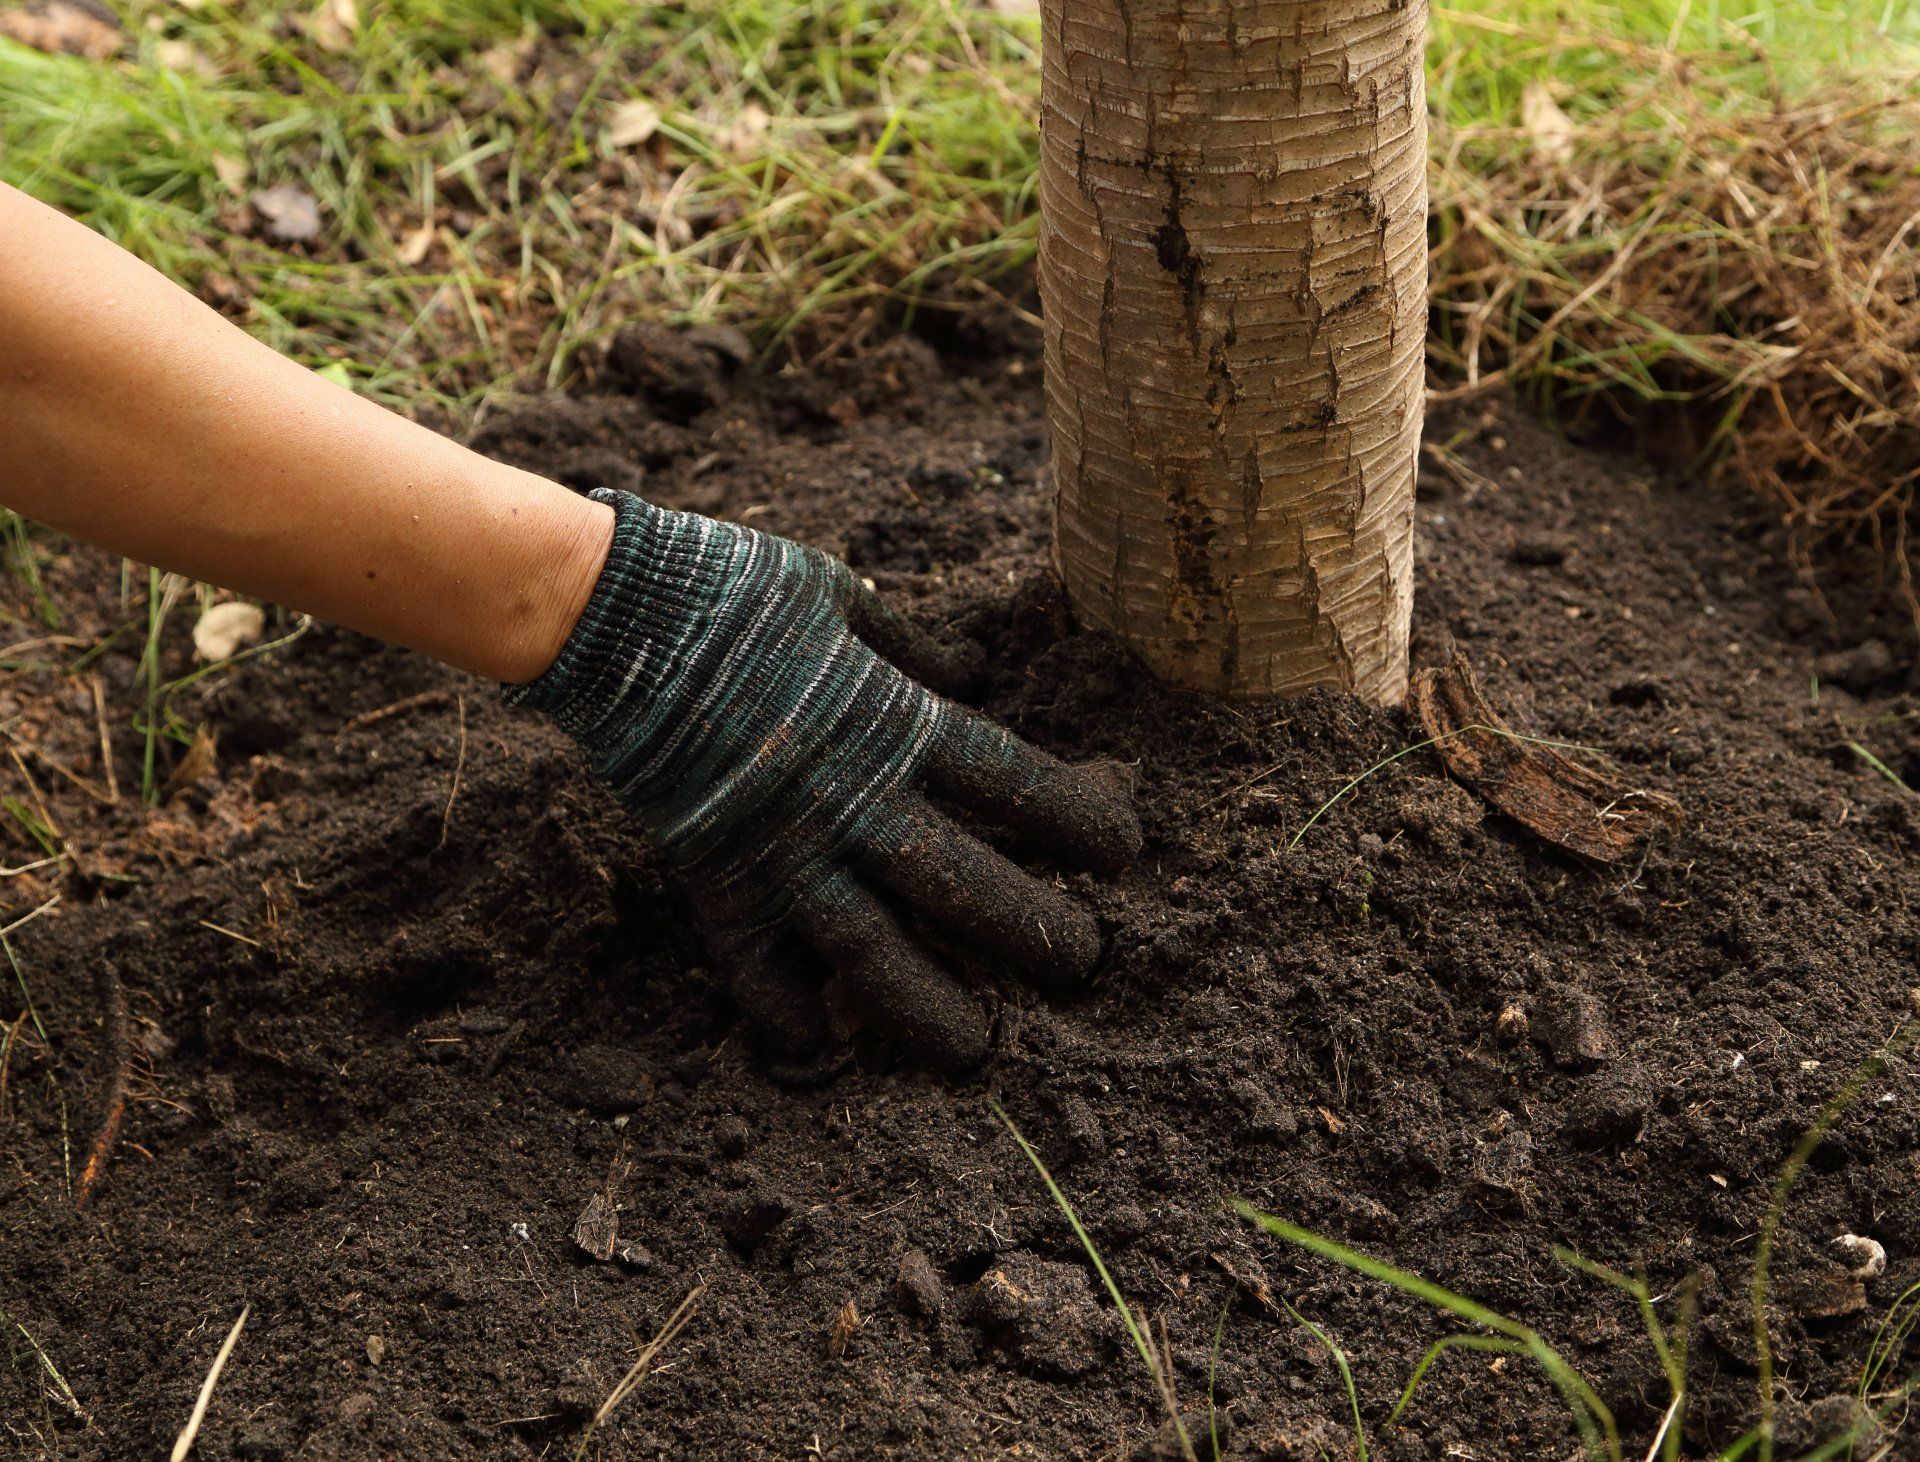 A person's hand gently planting a tree in rich, dark soil.